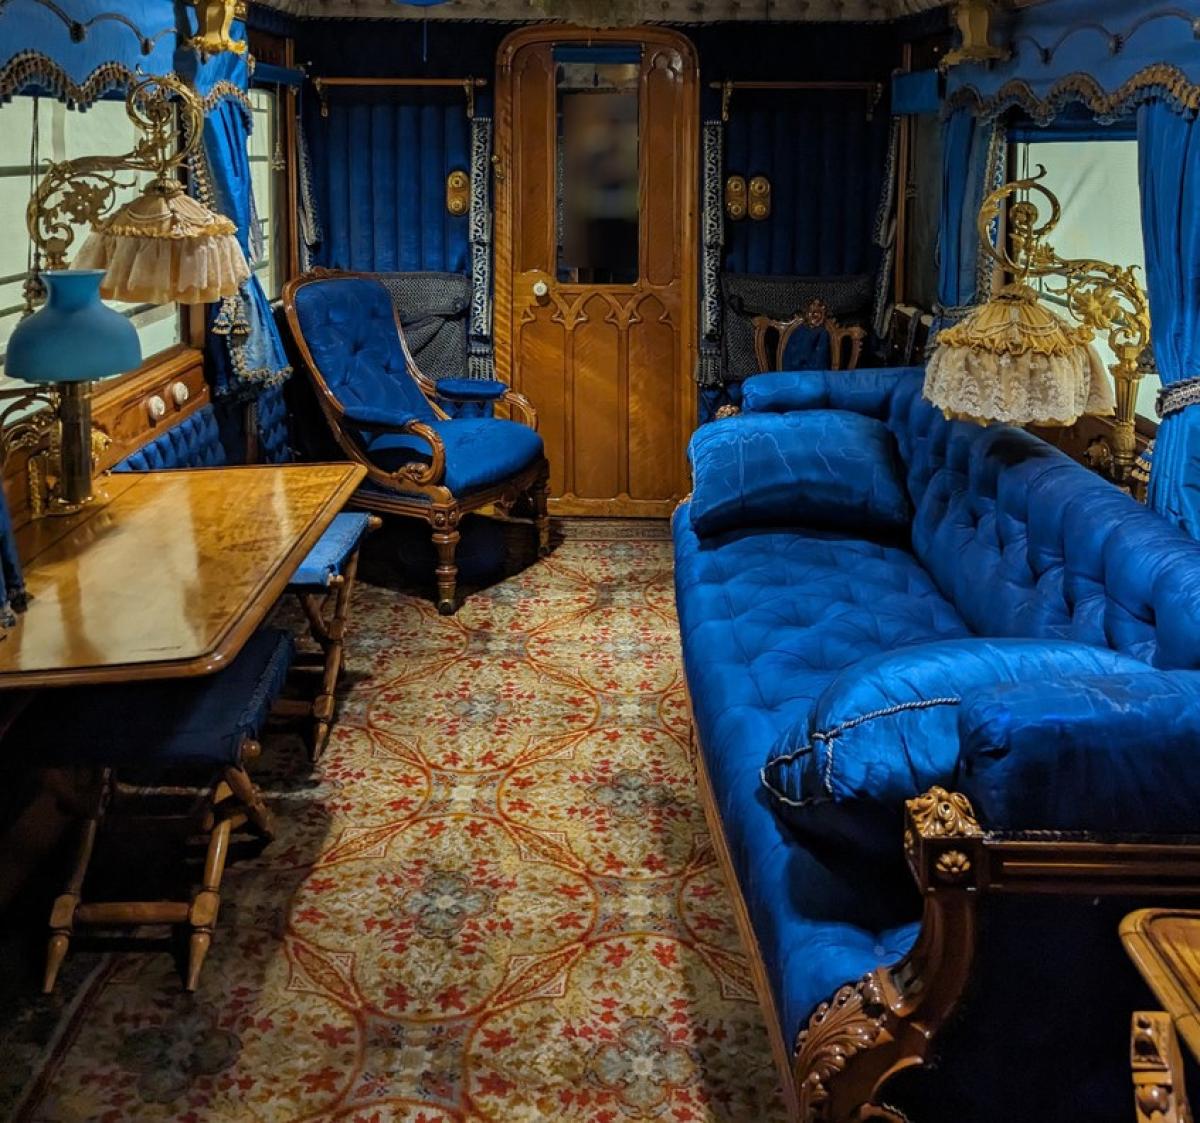 Interior image of Queen Victoria's lounge carriage. The furnishings and decor are a very rich blue. The ceiling is quilted fabric.